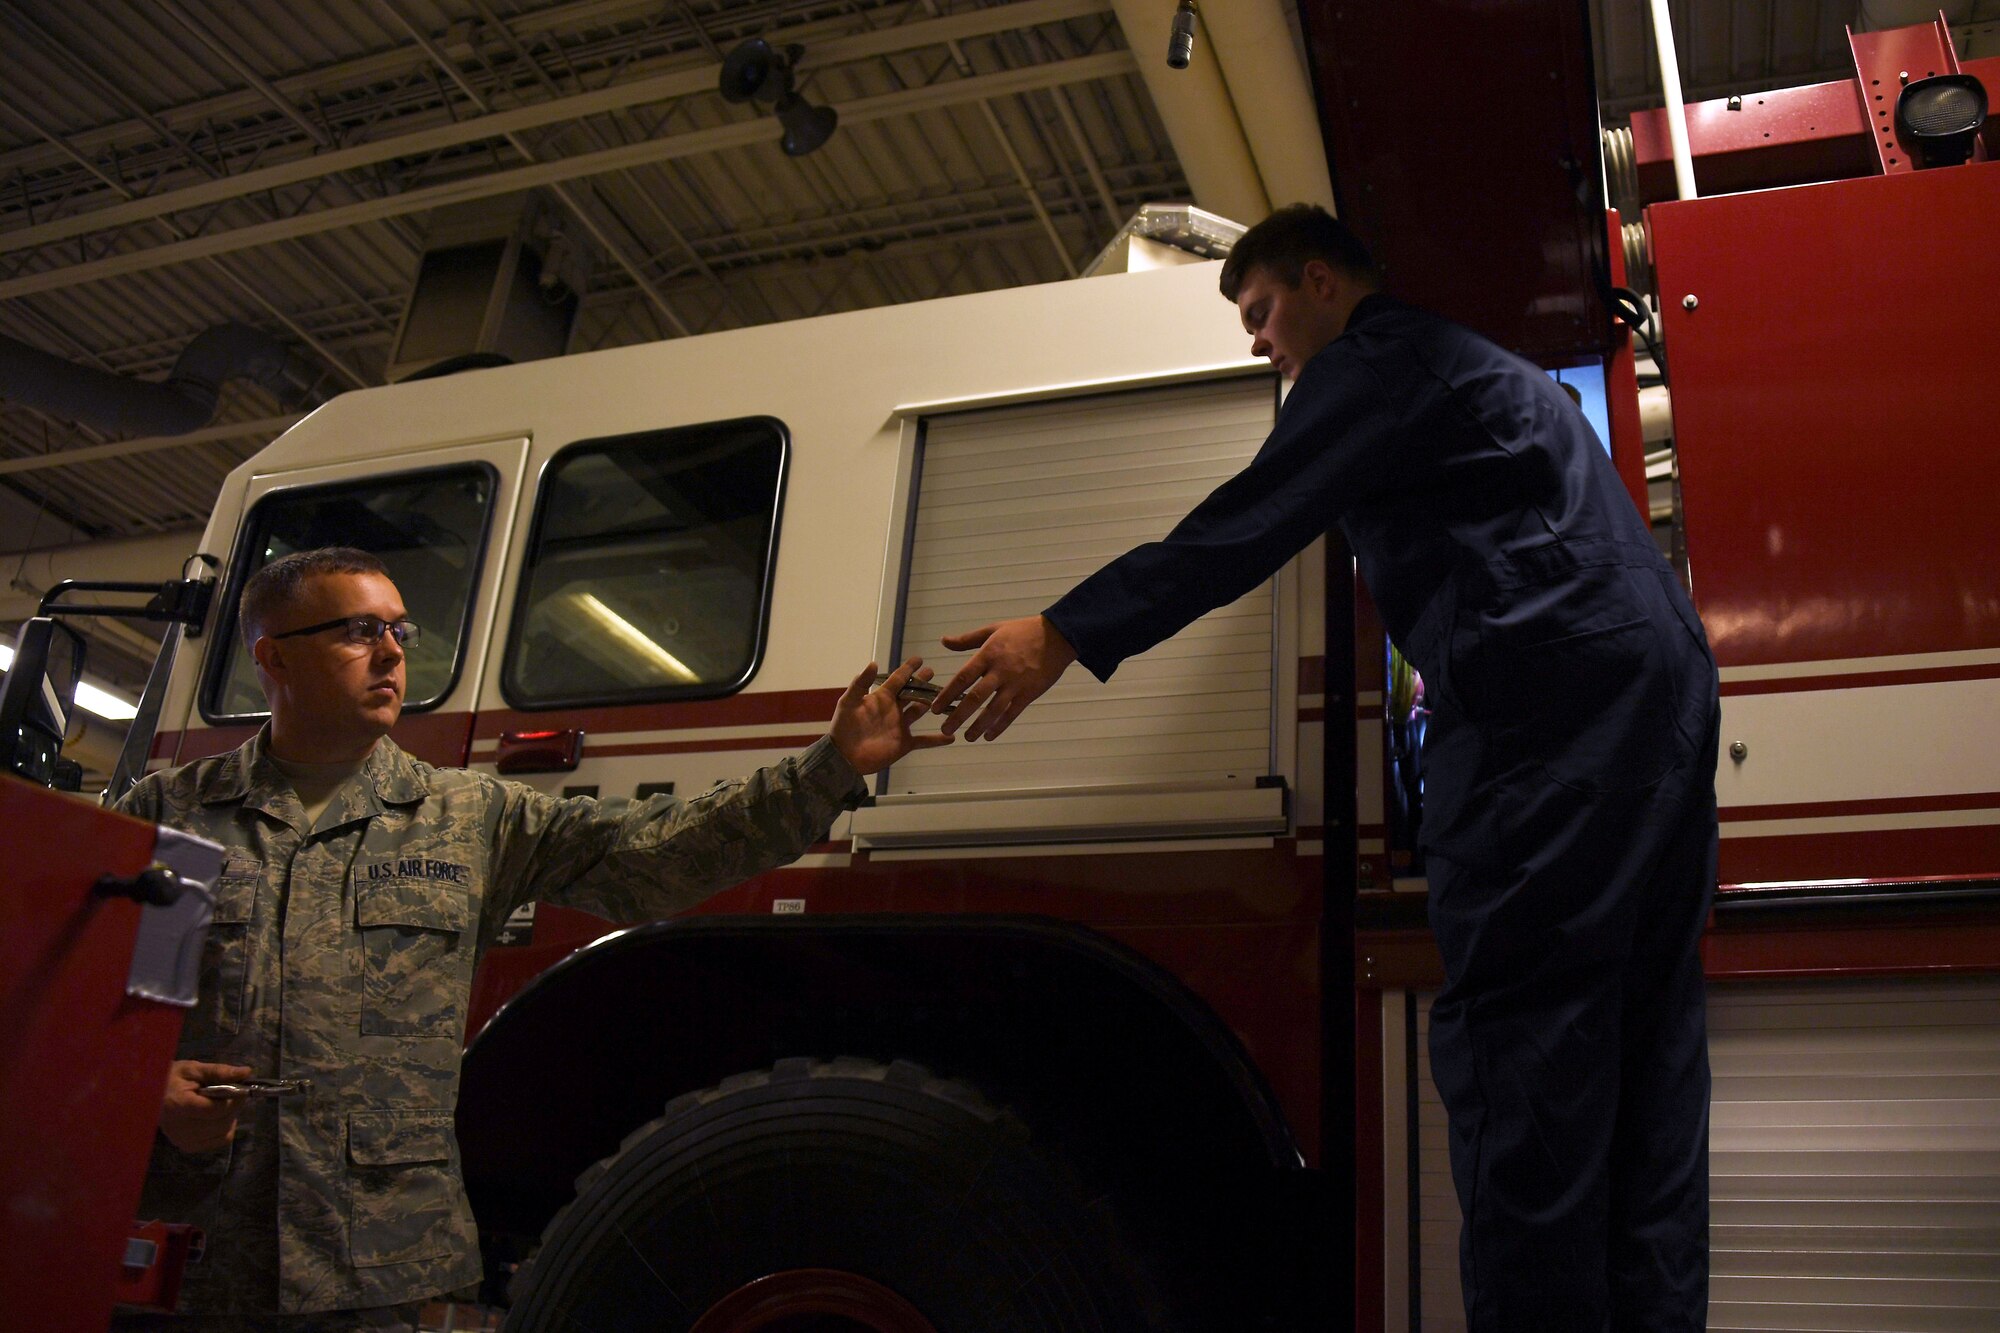 Airman 1st Class Jacob Westafer, 319th Logistics Readiness Squadron fire truck maintenance apprentice, returns a tool to his work station August 28, 2018, on Grand Forks Air Force Base, North Dakota. Westafer attended roughly five months of technical training in order to learn about miscellaneous tools, vehicular pieces and operations, but he says a majority of what he knows now is due to his on-the-job training. (U.S. Air Force photo by Airman 1st Class Elora J. Martinez)